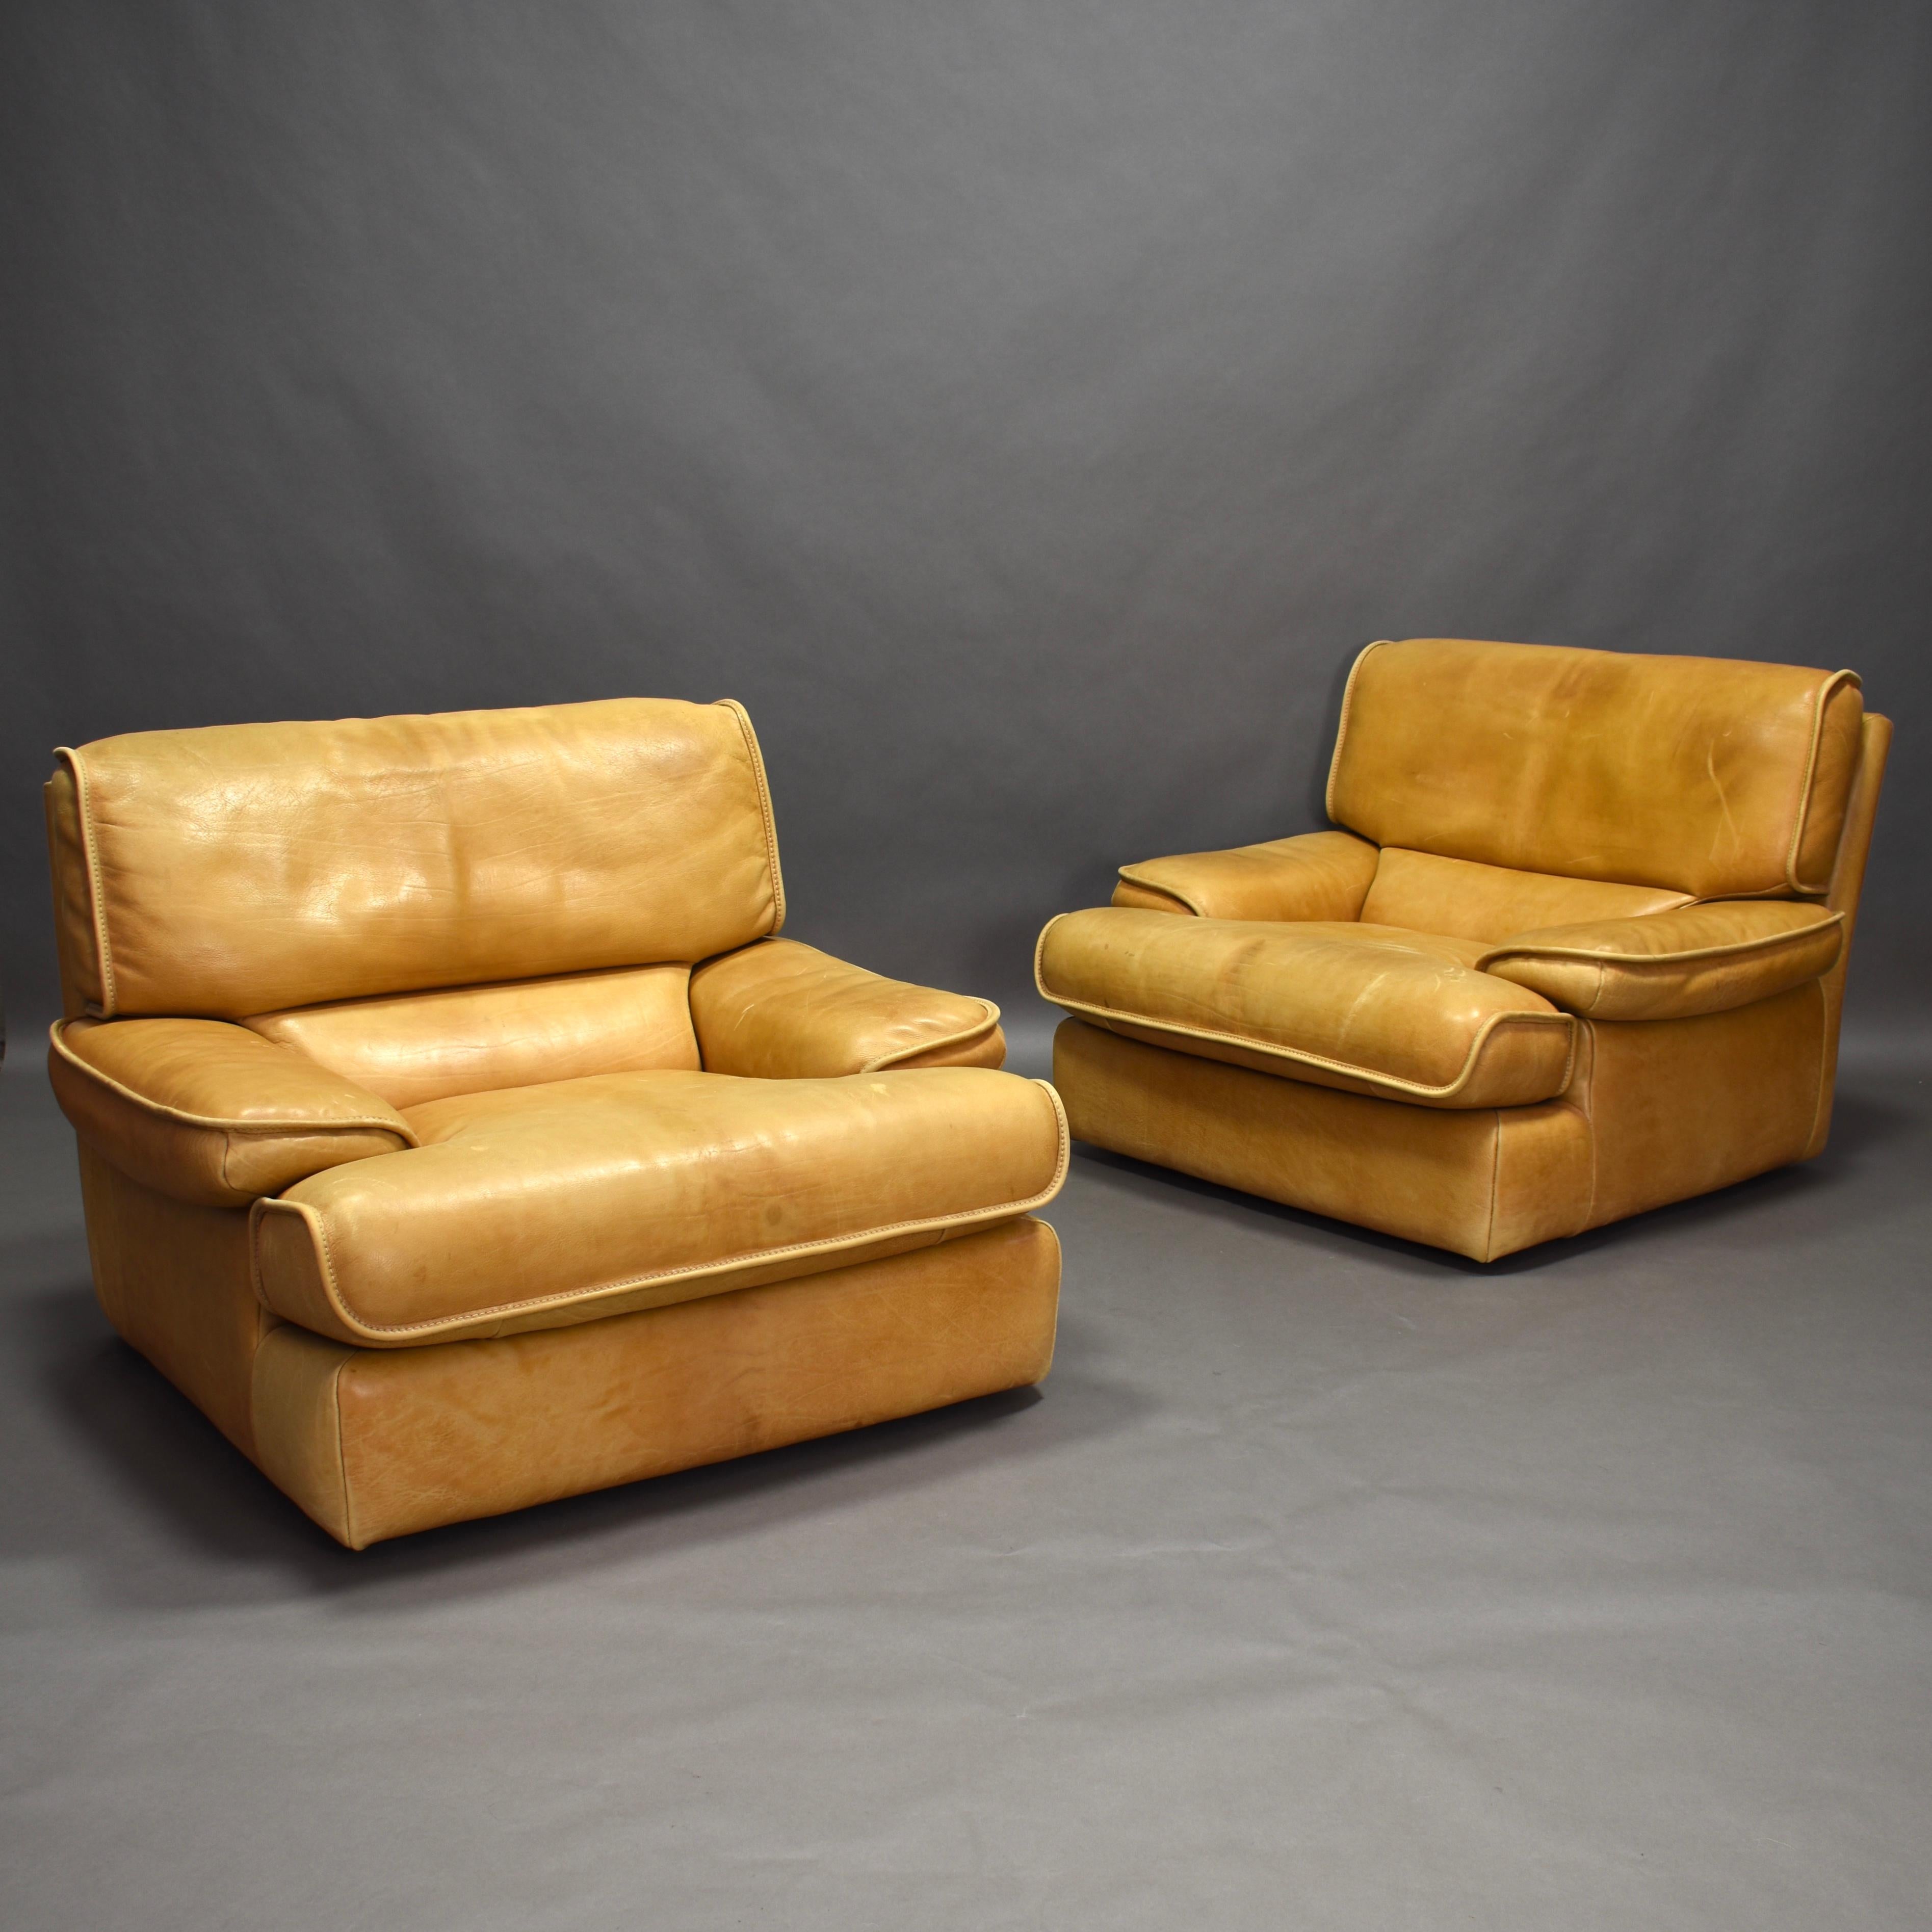 Pair of 1970s club armchairs. The chairs are made in a thick and sturdy tan leather in high quality. They are very comfortable, durable and still remain in very good vintage condition. Some normal signs of age and use but with minimal wear and no